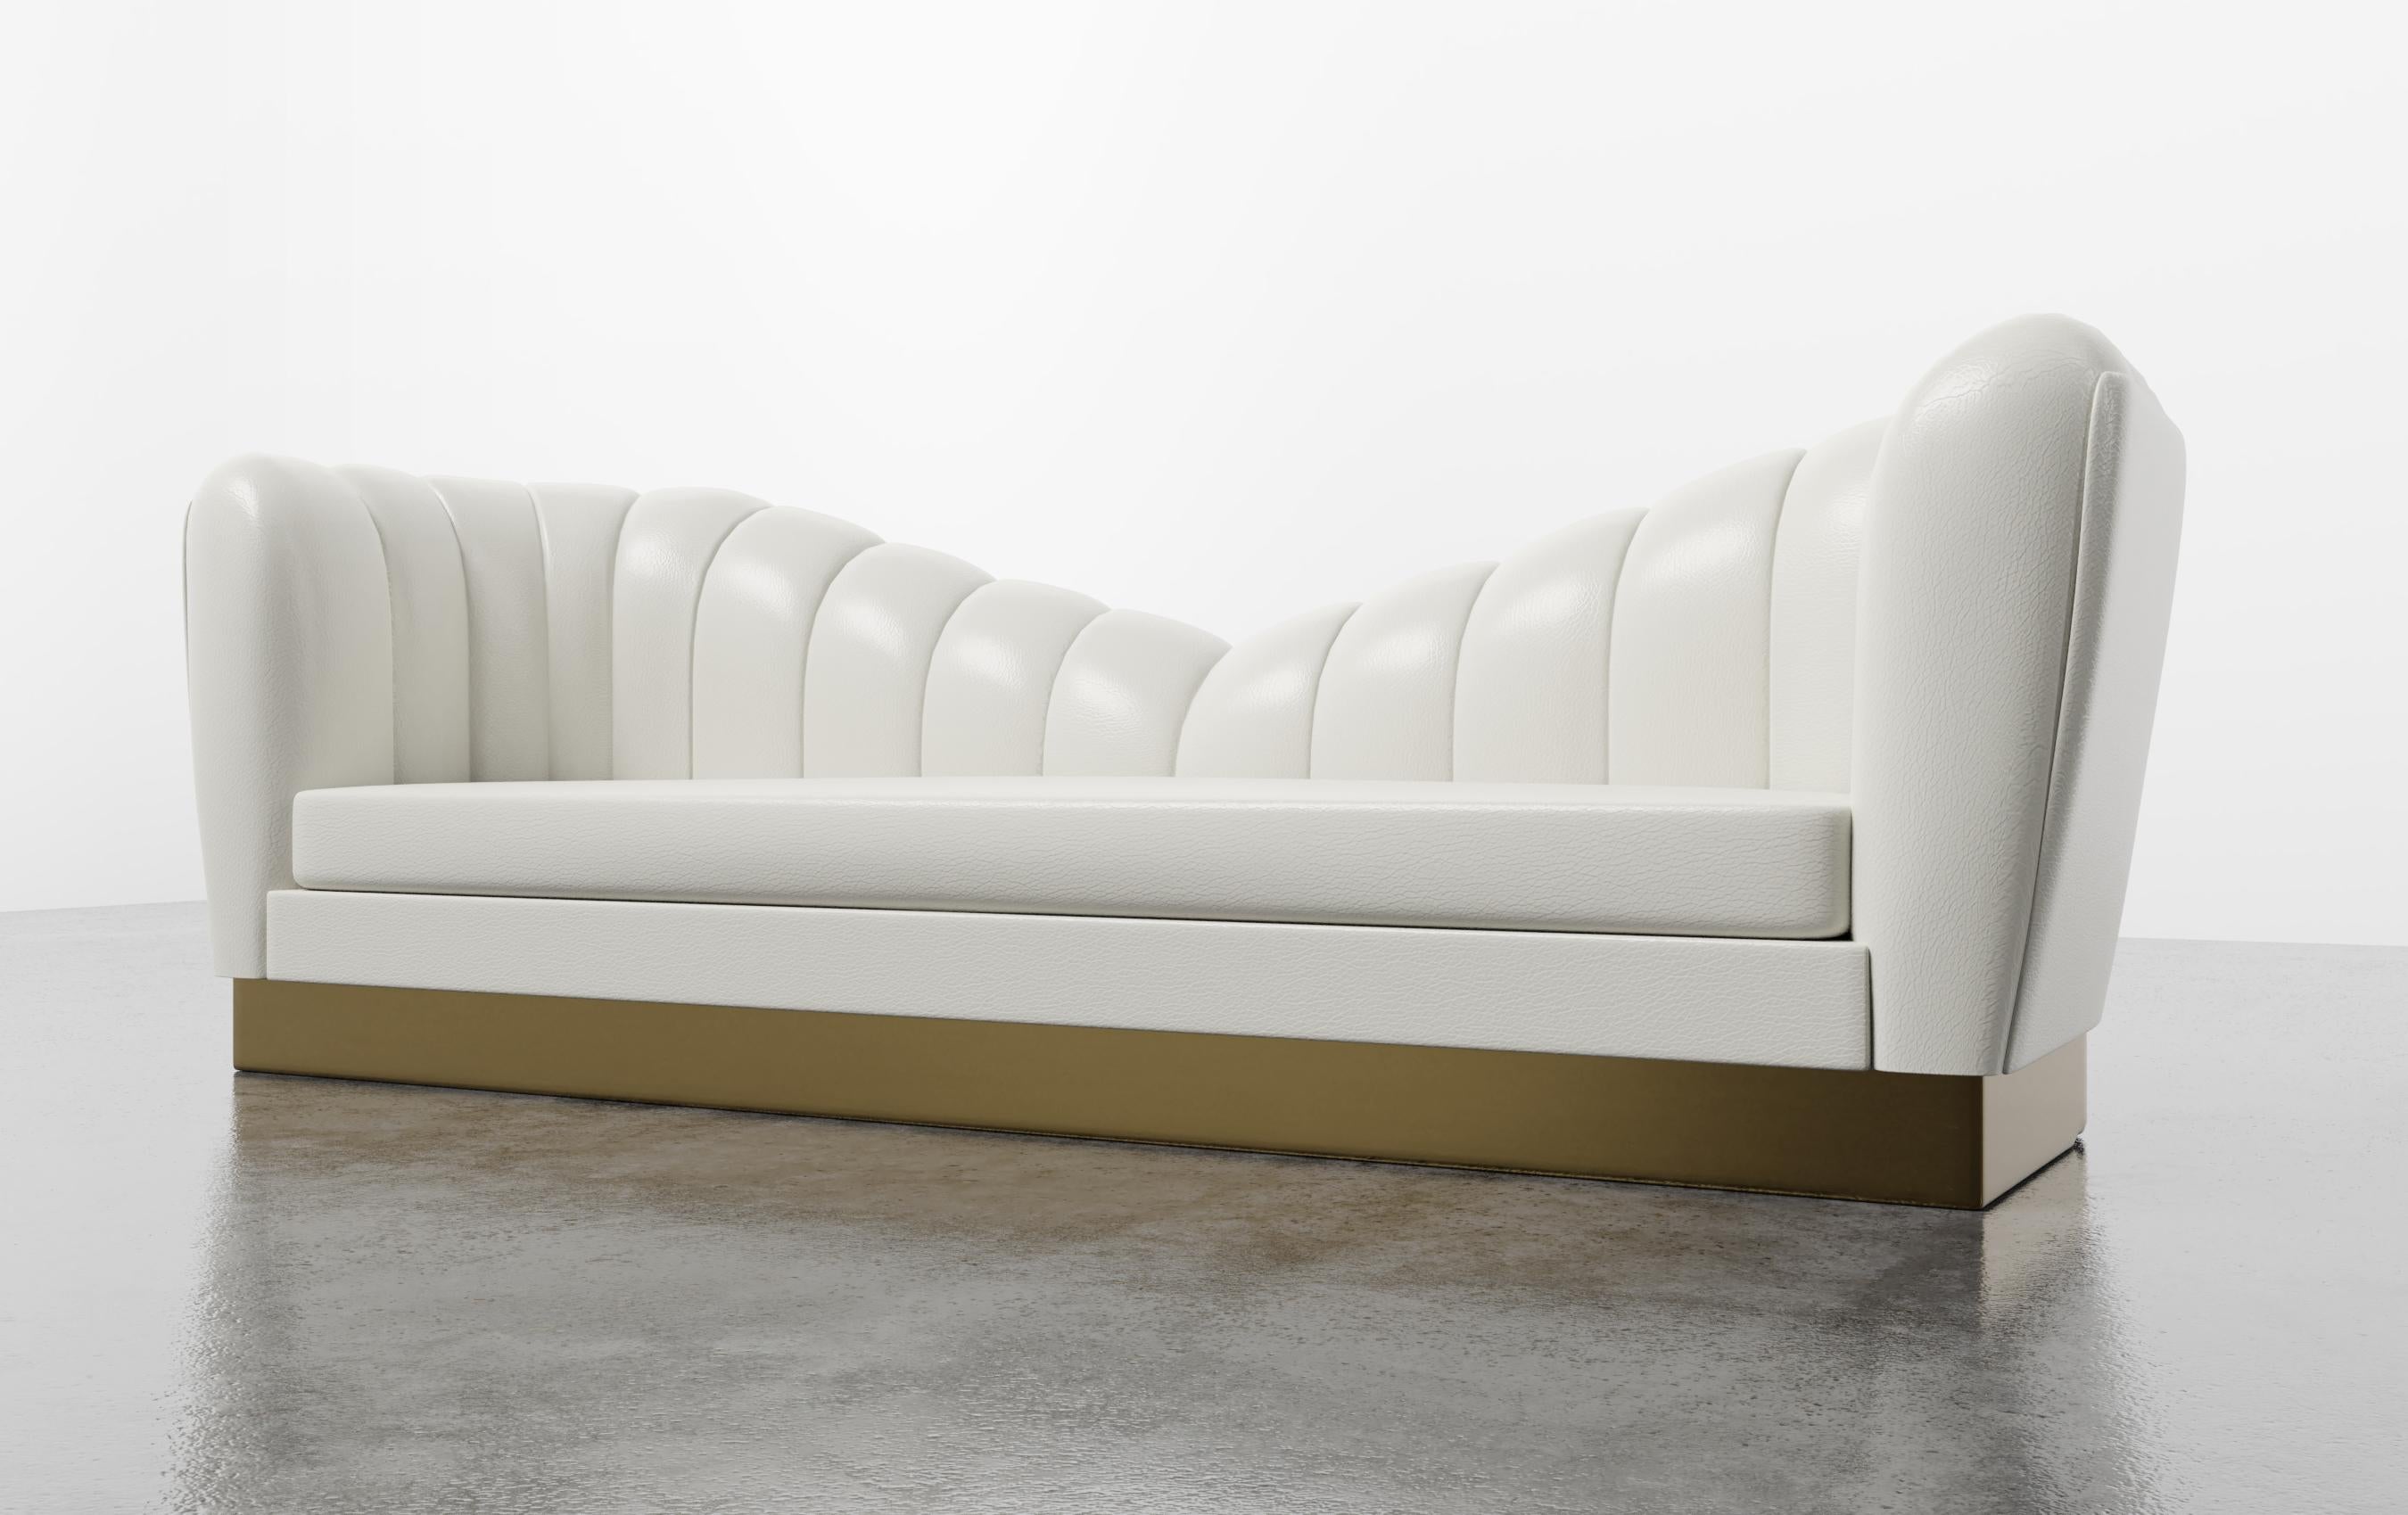 GUINEVERE SOFA - Modern Symmetrical Sofa in Faux White Leather with Metal Plinth

The Guinevere Sofa is a luxurious piece of furniture that takes inspiration from the curvature of Gaudi architecture. It features symmetrical channeled scalloped